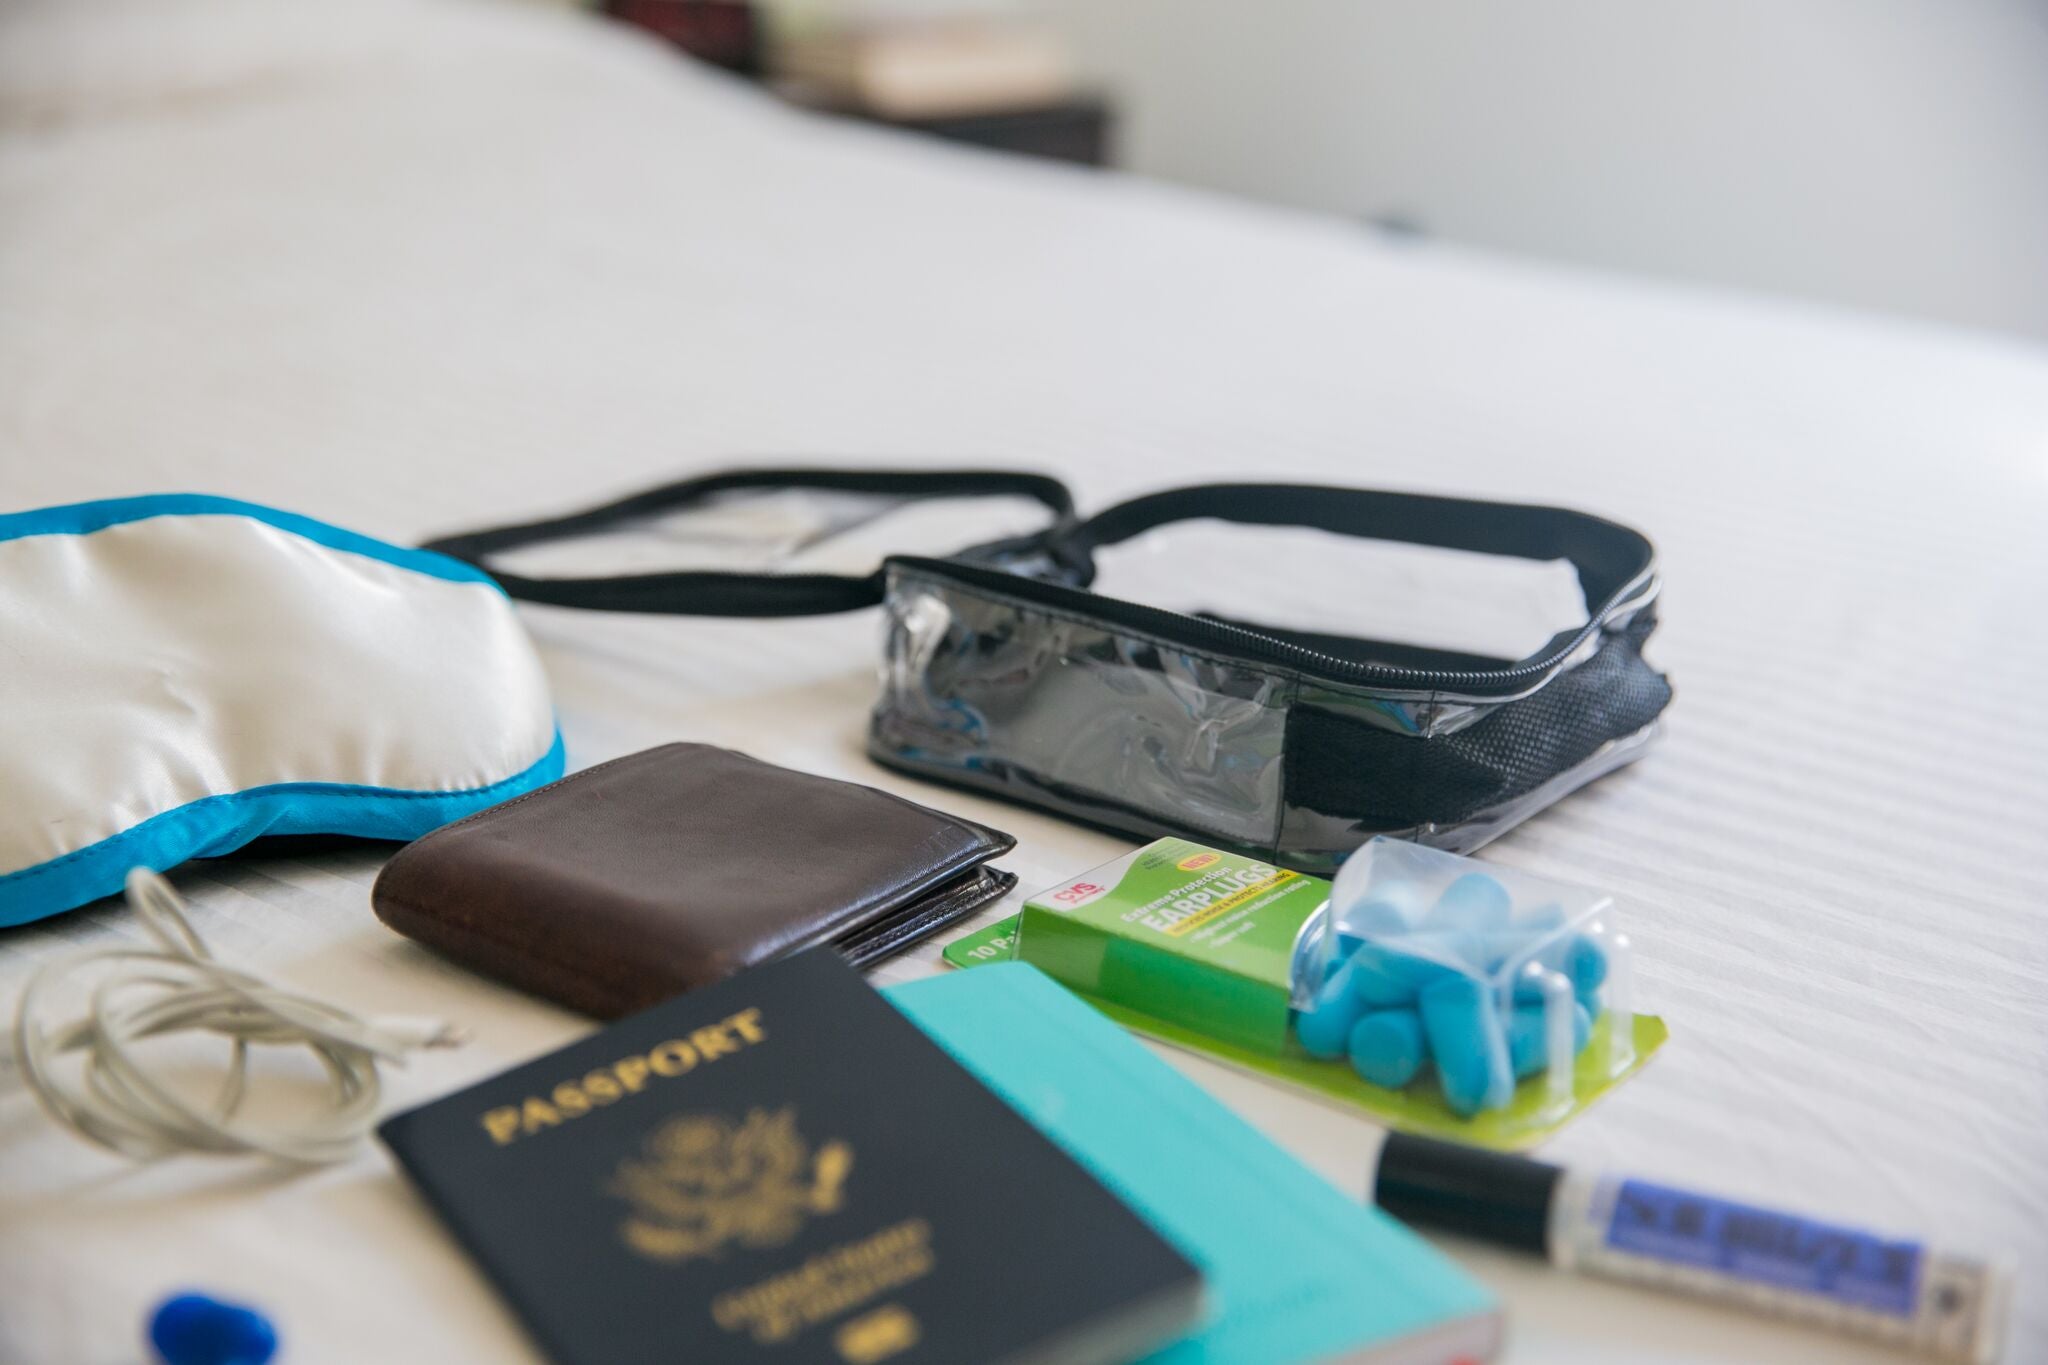 Earplugs, eye mask and other sleeping essentials in black packing cube